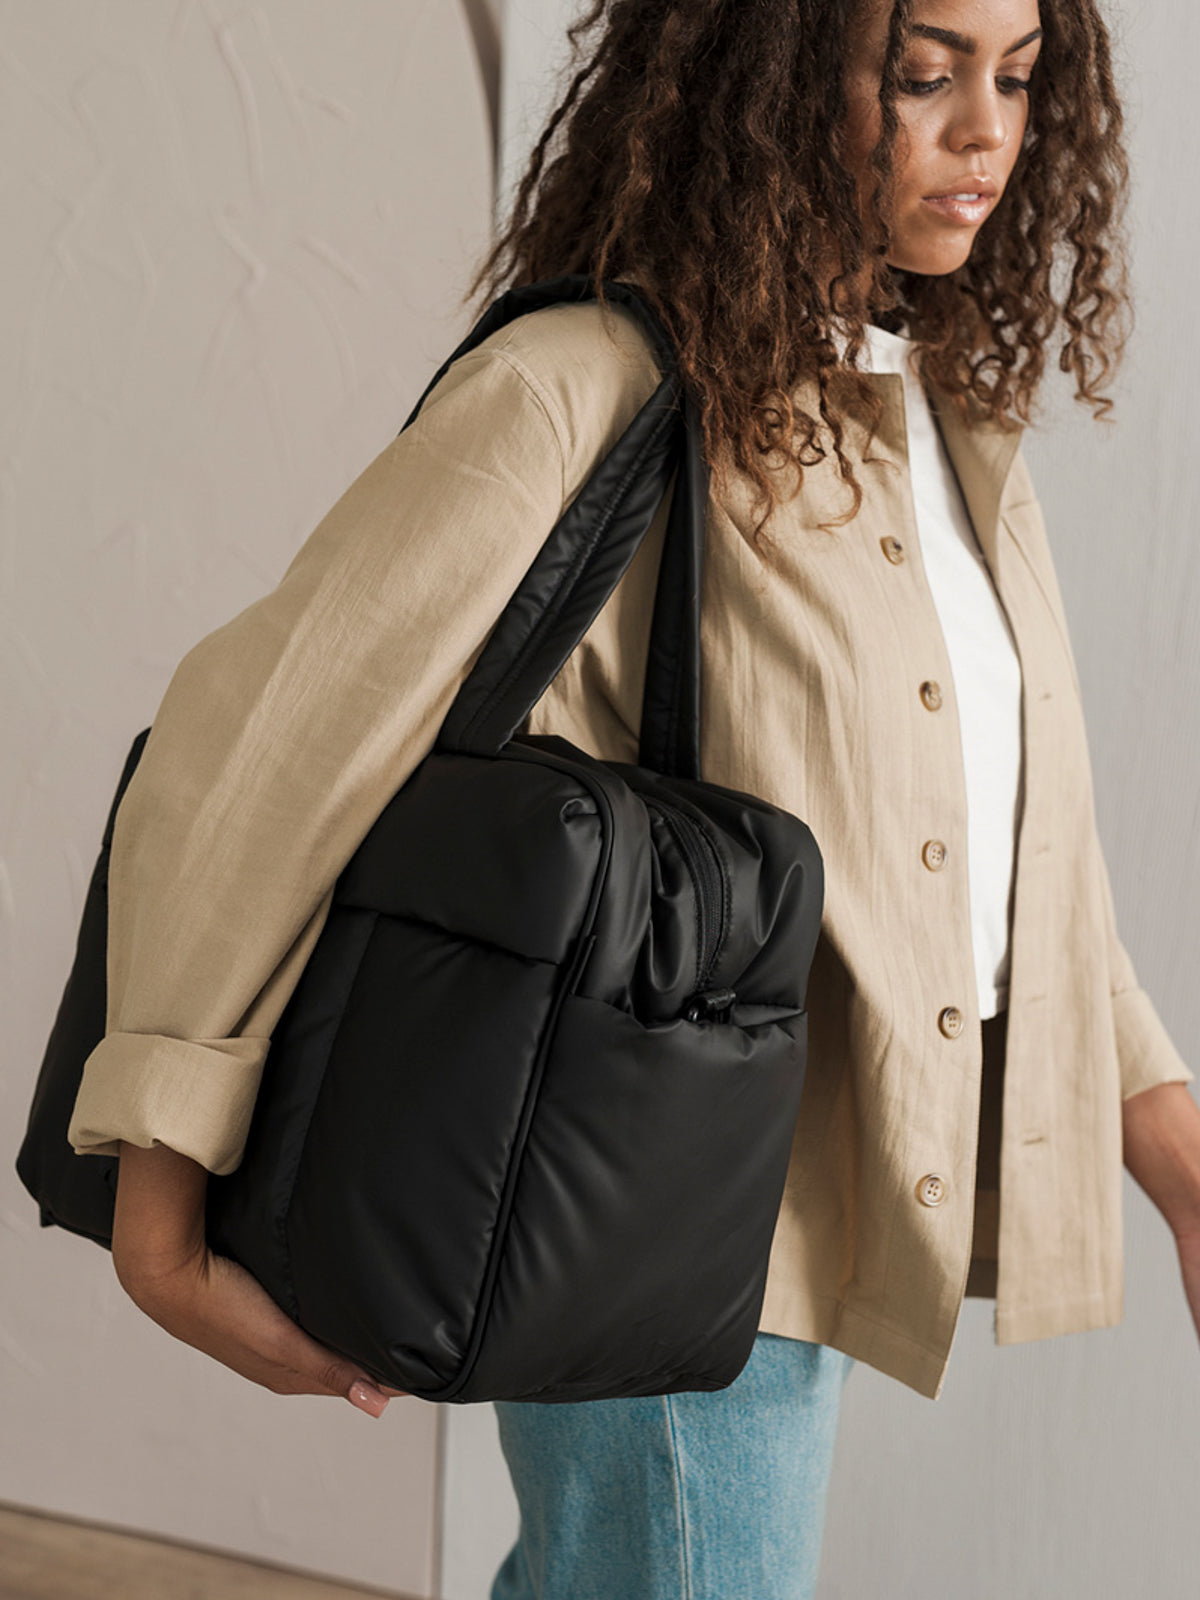 LetsPackIt: 6 days and 8 outfits in the Calpak Luka Duffle bag